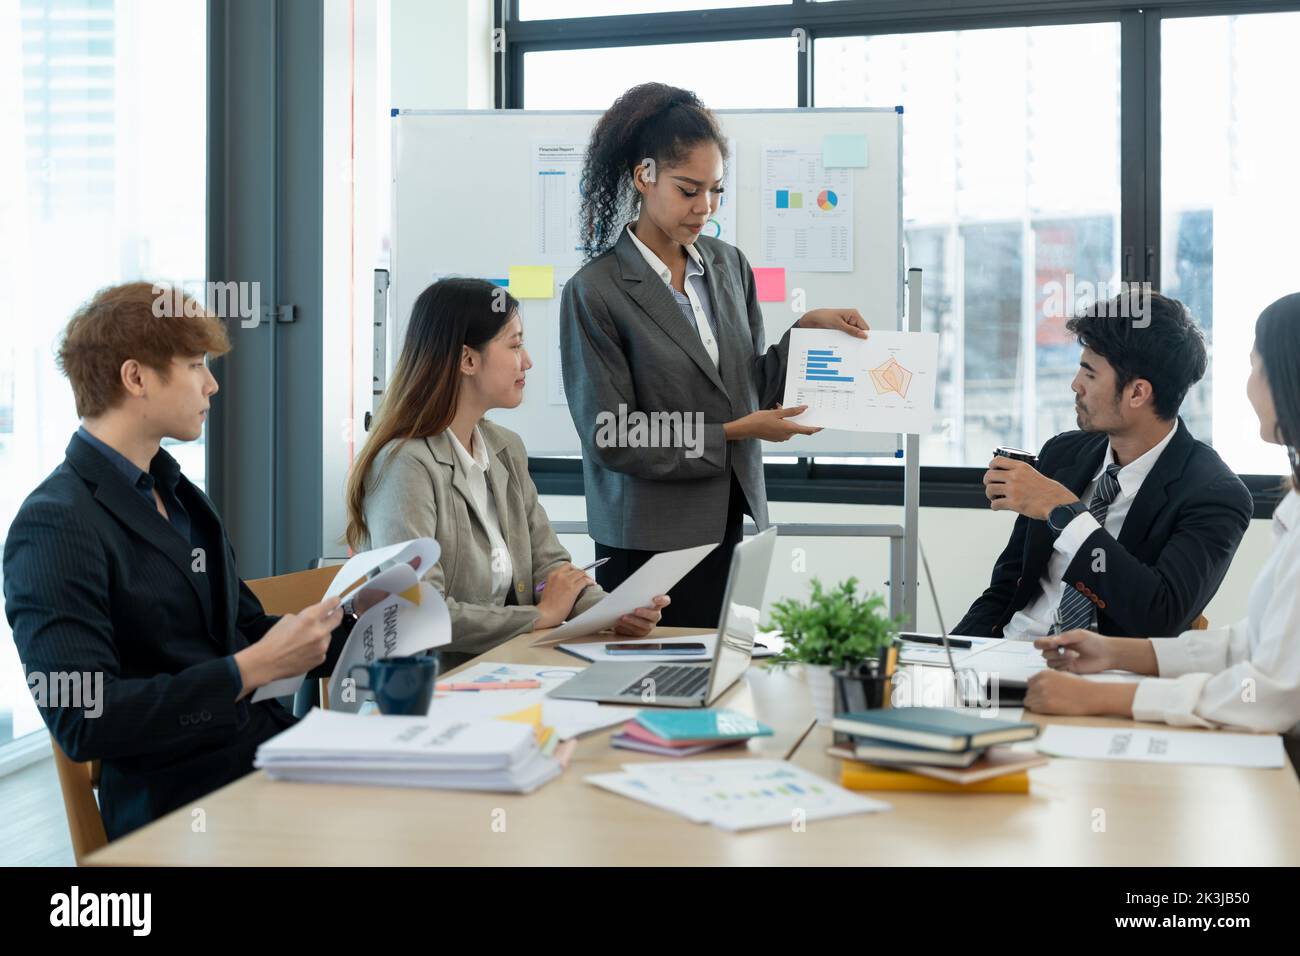 diverse business team people discuss financial result review paperwork share ideas brainstorm collaborate work in teamwork at group briefing table. Stock Photo